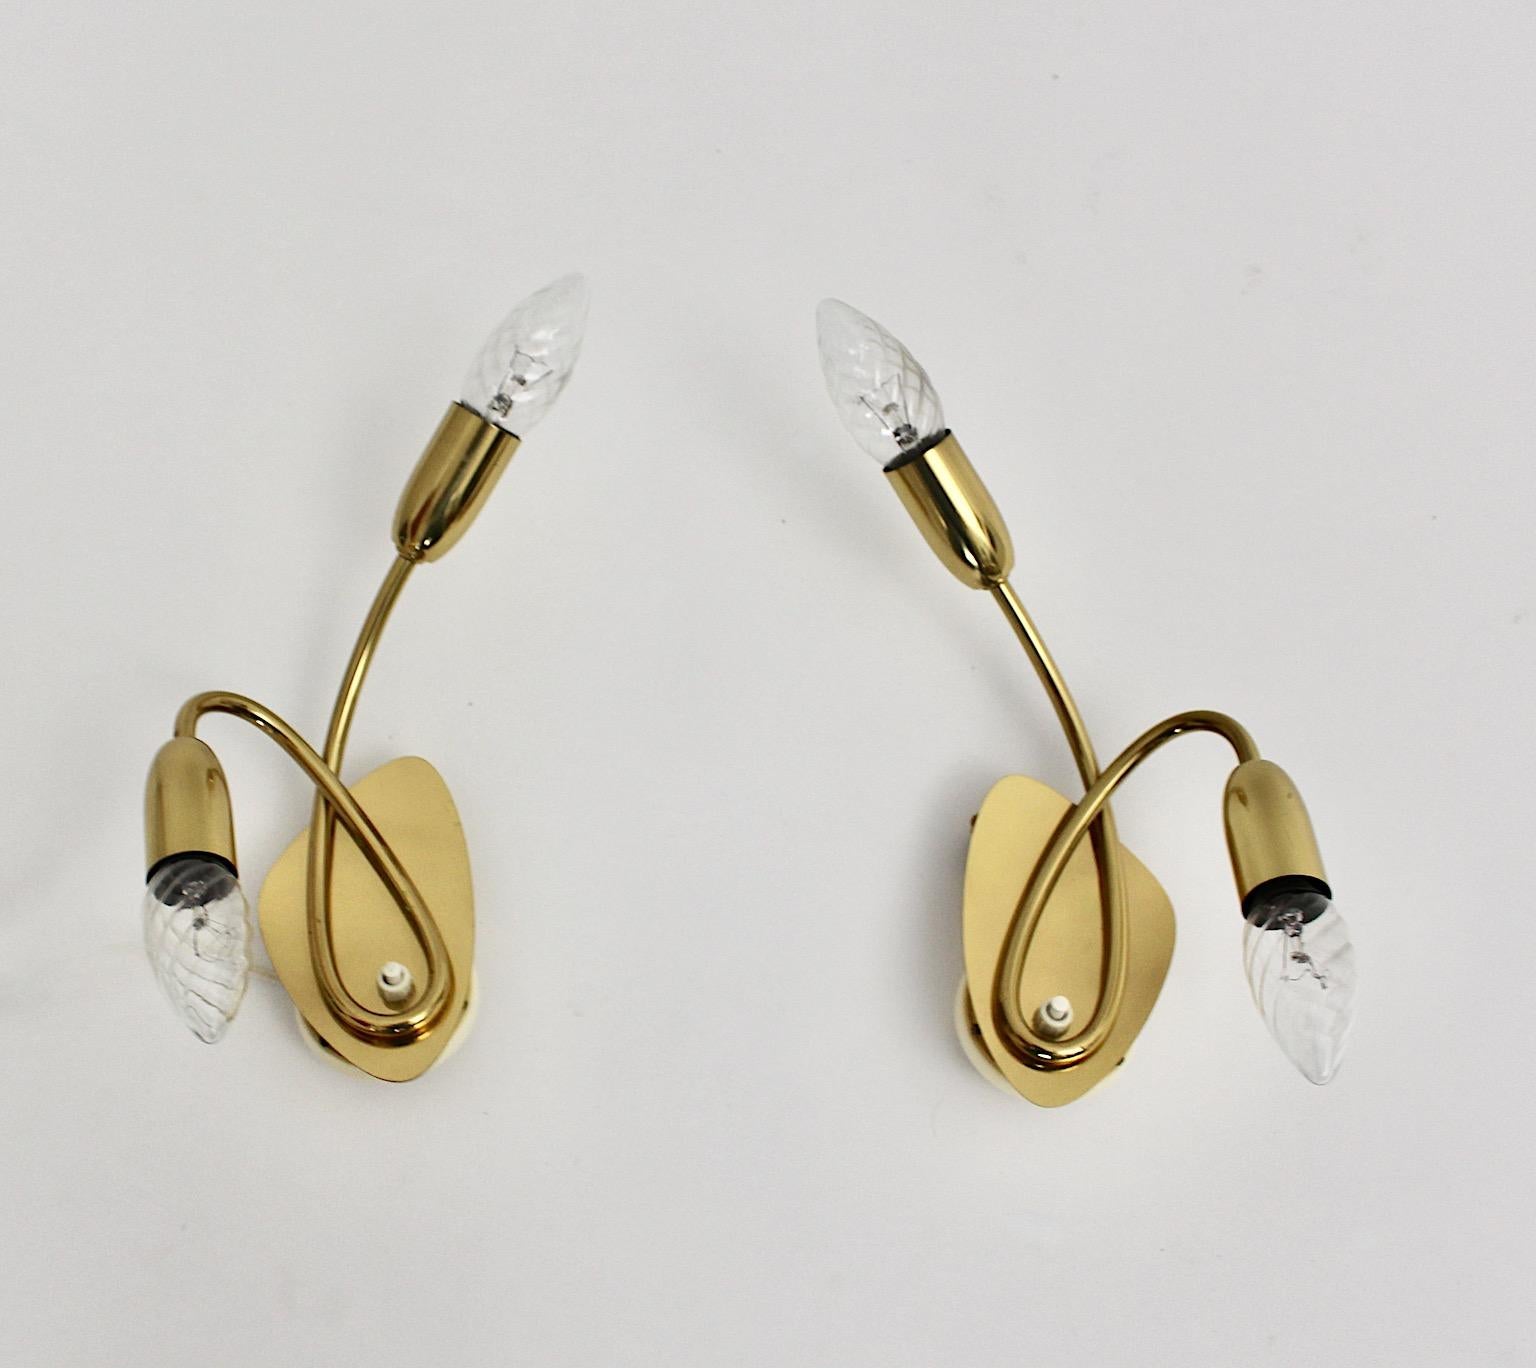 Mid Century Modern vintage pair of sconces or wall lights from brass in elegant curved shape 1950s Italy.
A graceful pair of wall lights or sconces from brass each with two E 14 sockets and a push button at the base.
This duo of wall lightings